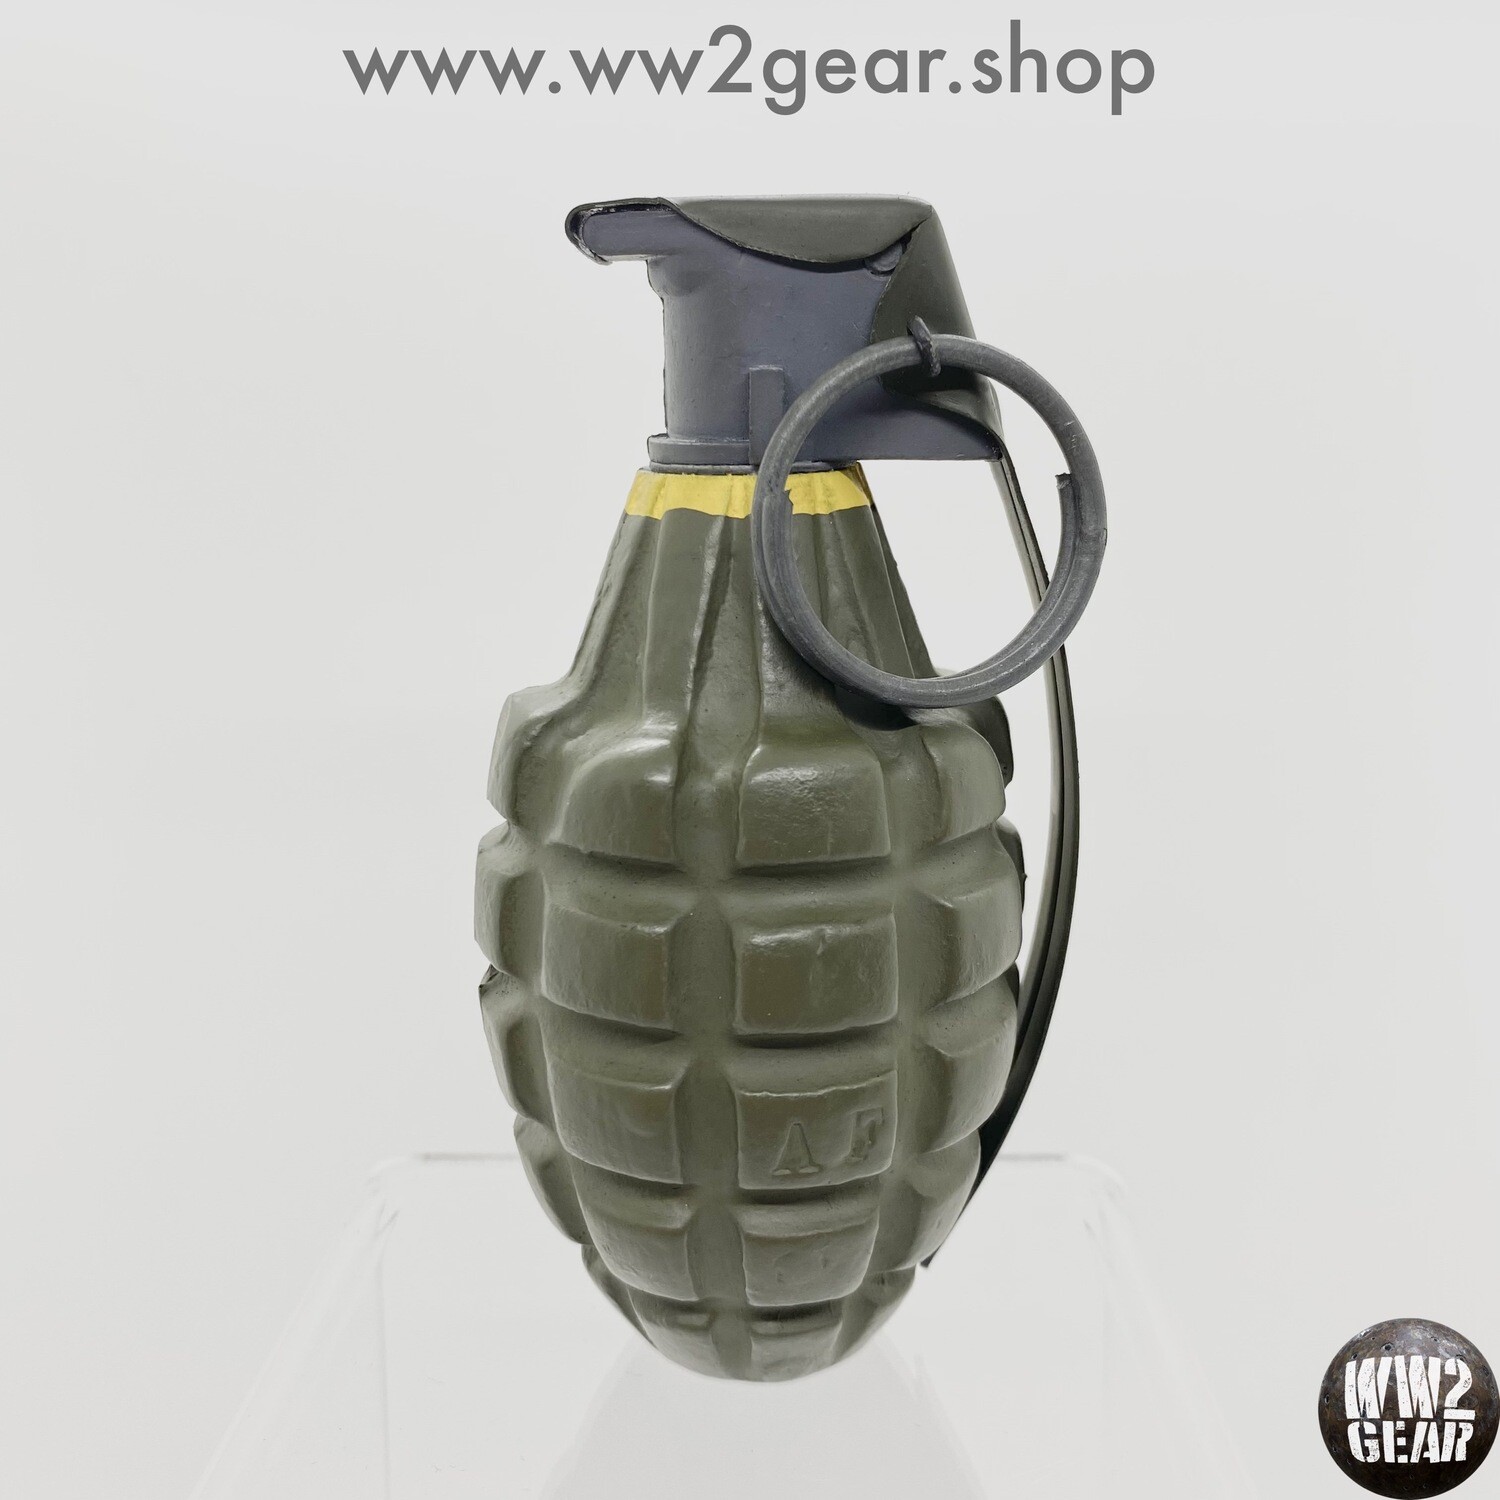 US WW2 MKII Pineapple Frag Grenade - OD Green (Resin Reproduction)